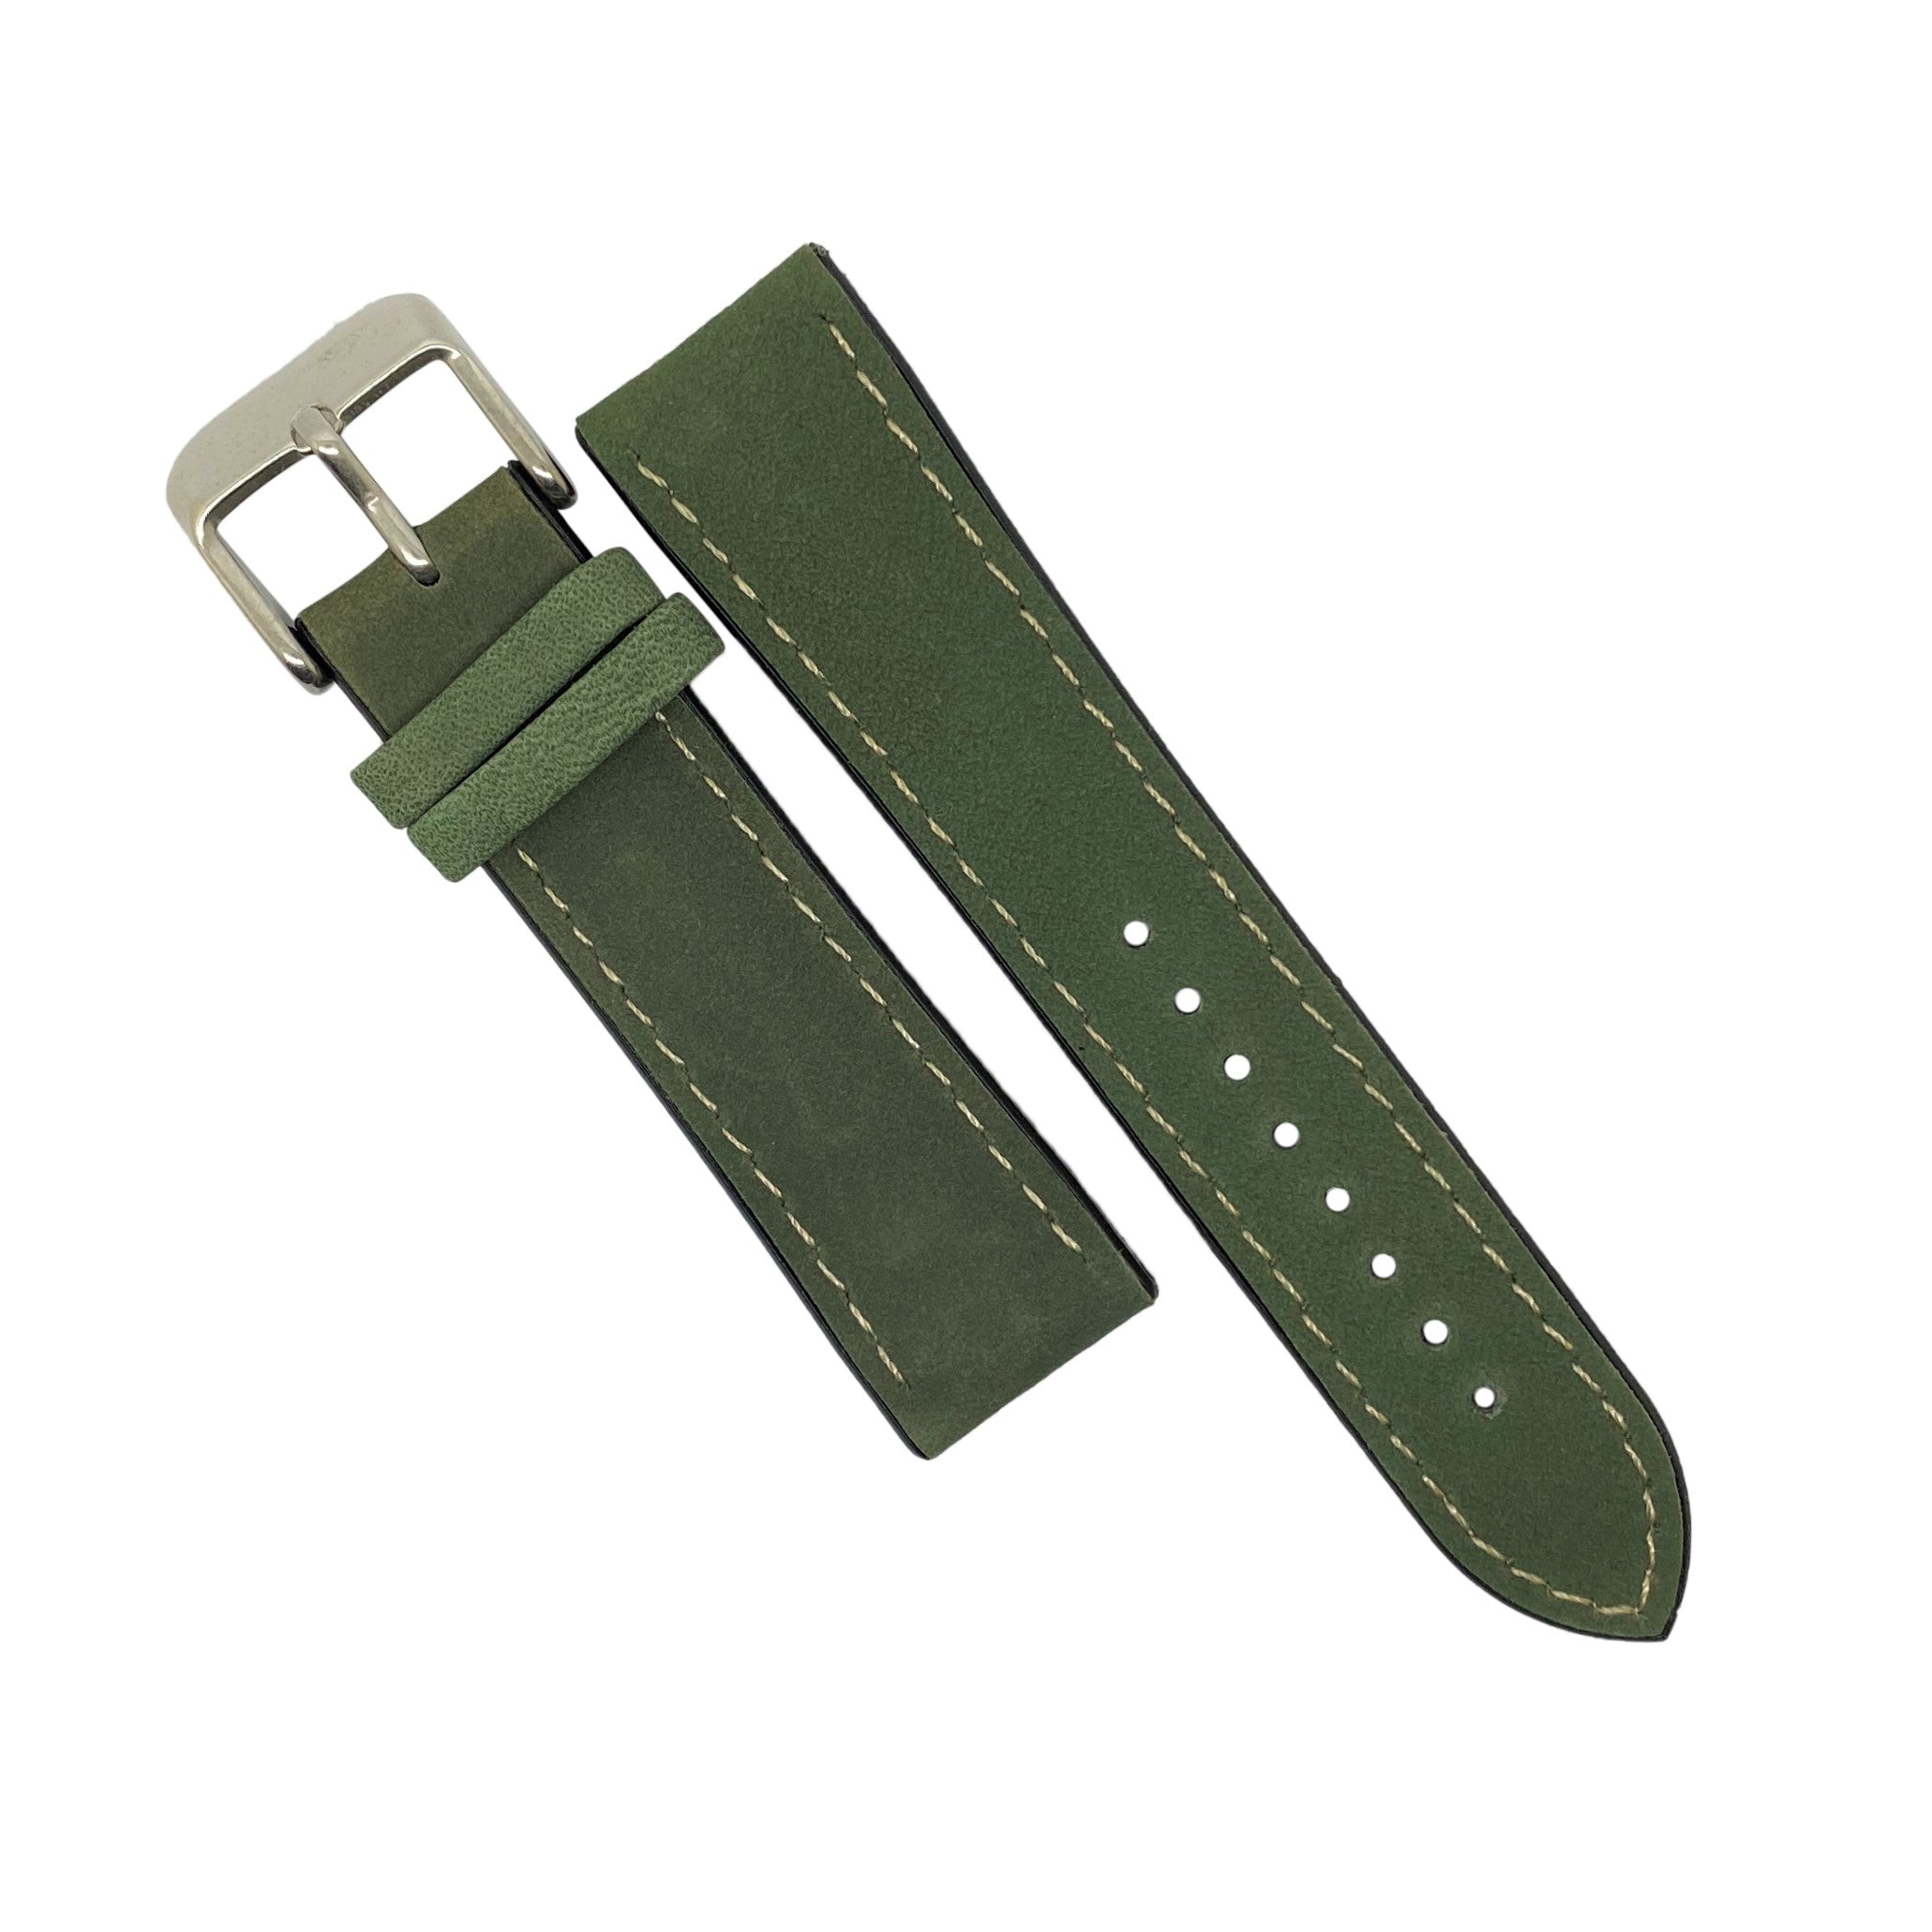 Performax Matt Leather Hybrid Strap in Olive (20mm) - Nomad Watch Works SG